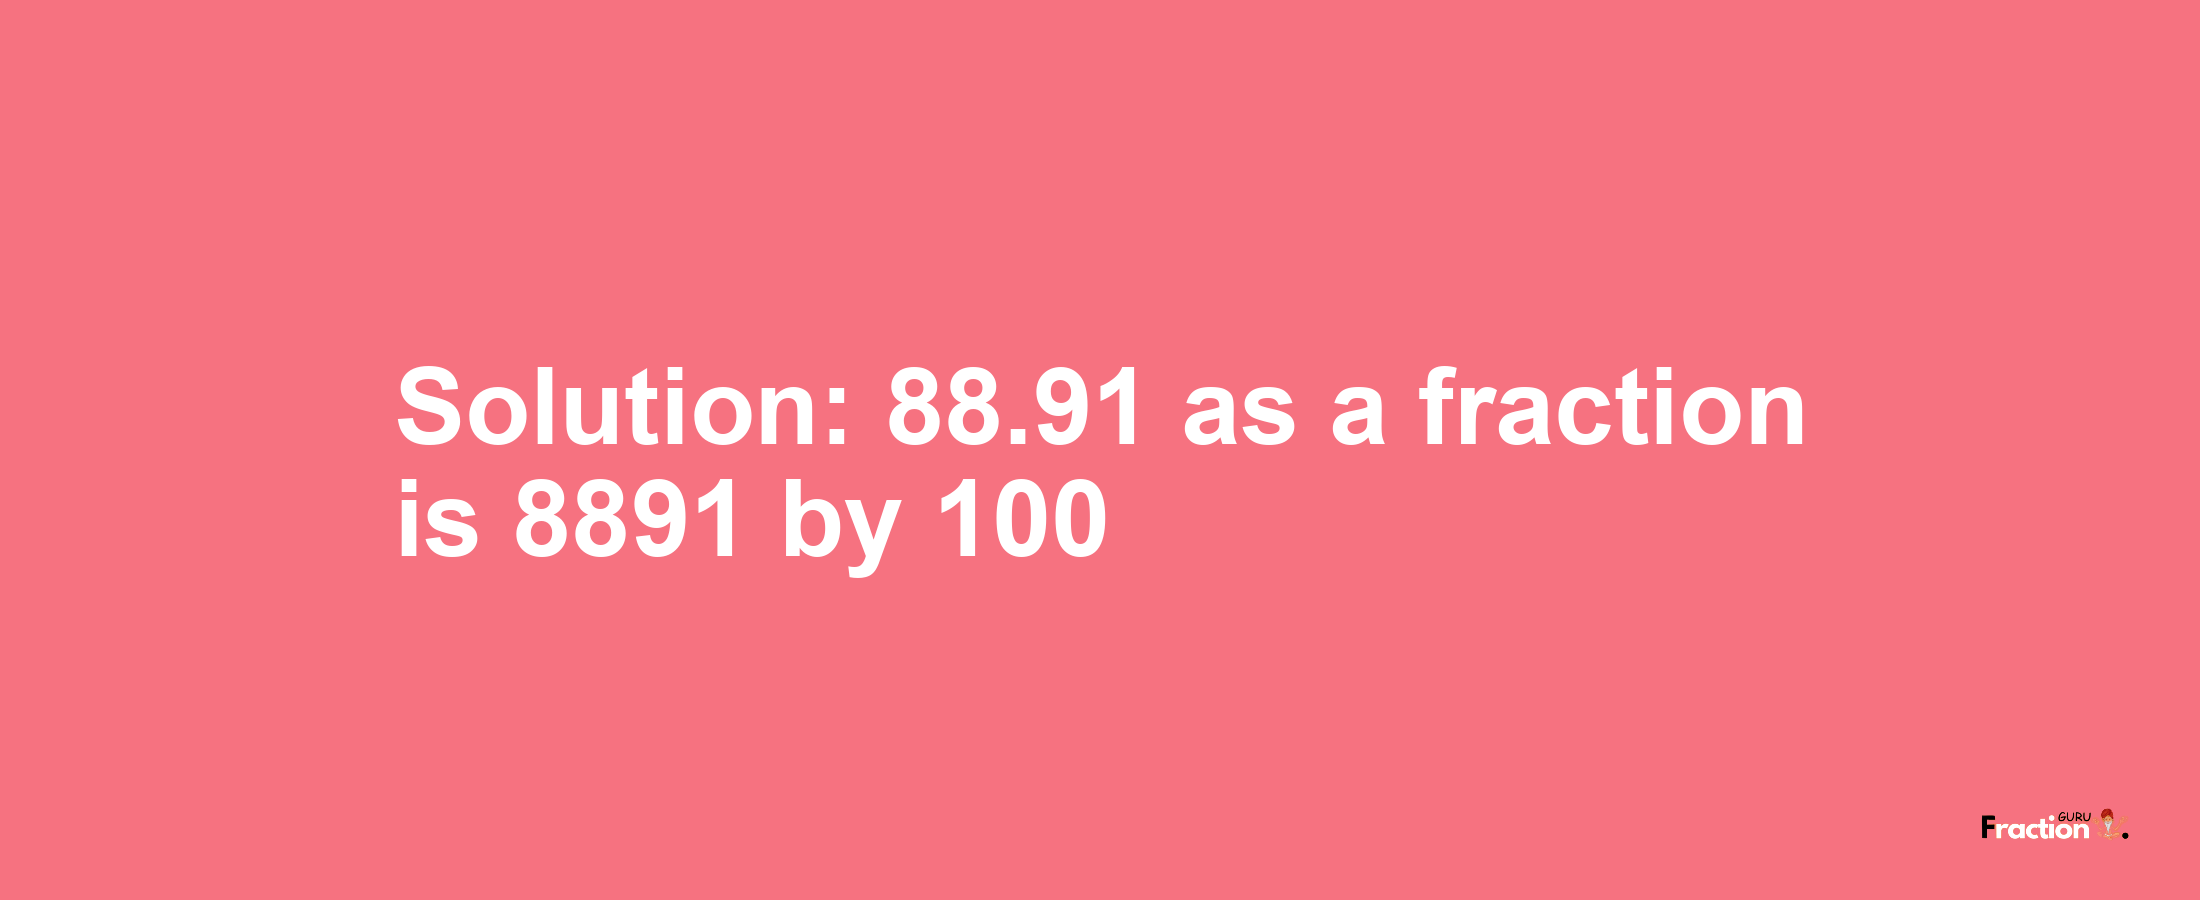 Solution:88.91 as a fraction is 8891/100